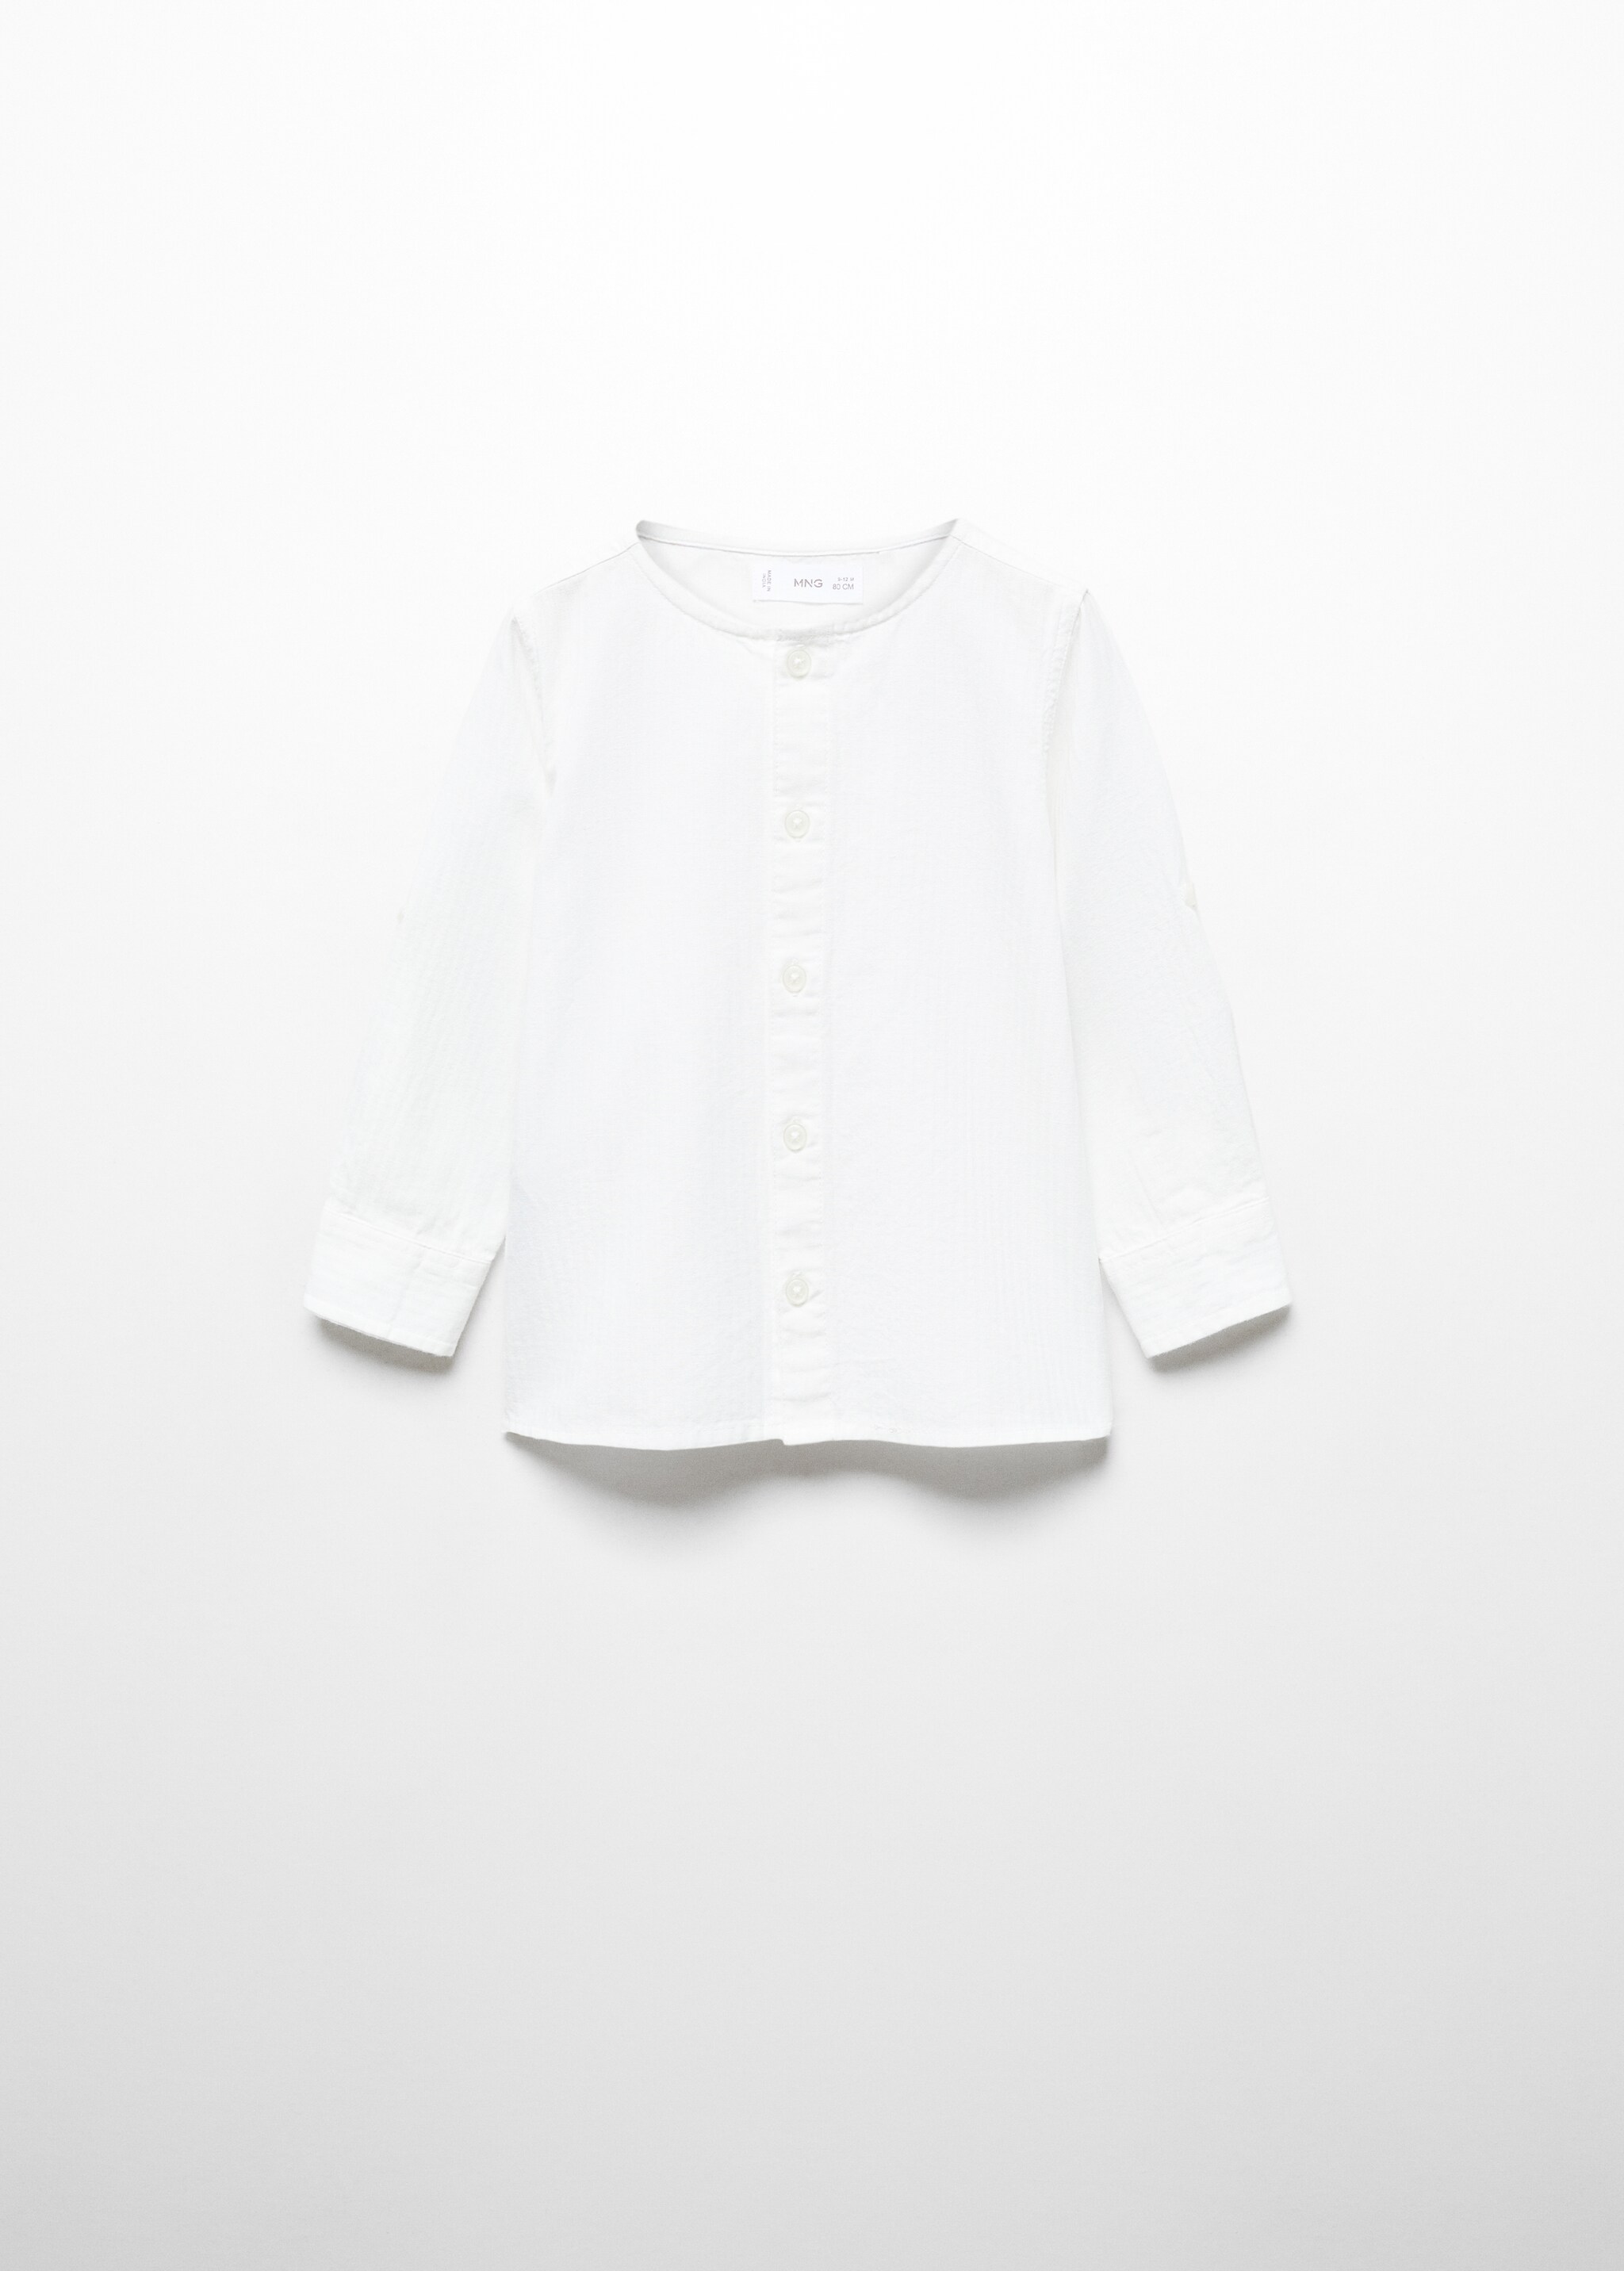 Mao collar shirt - Article without model